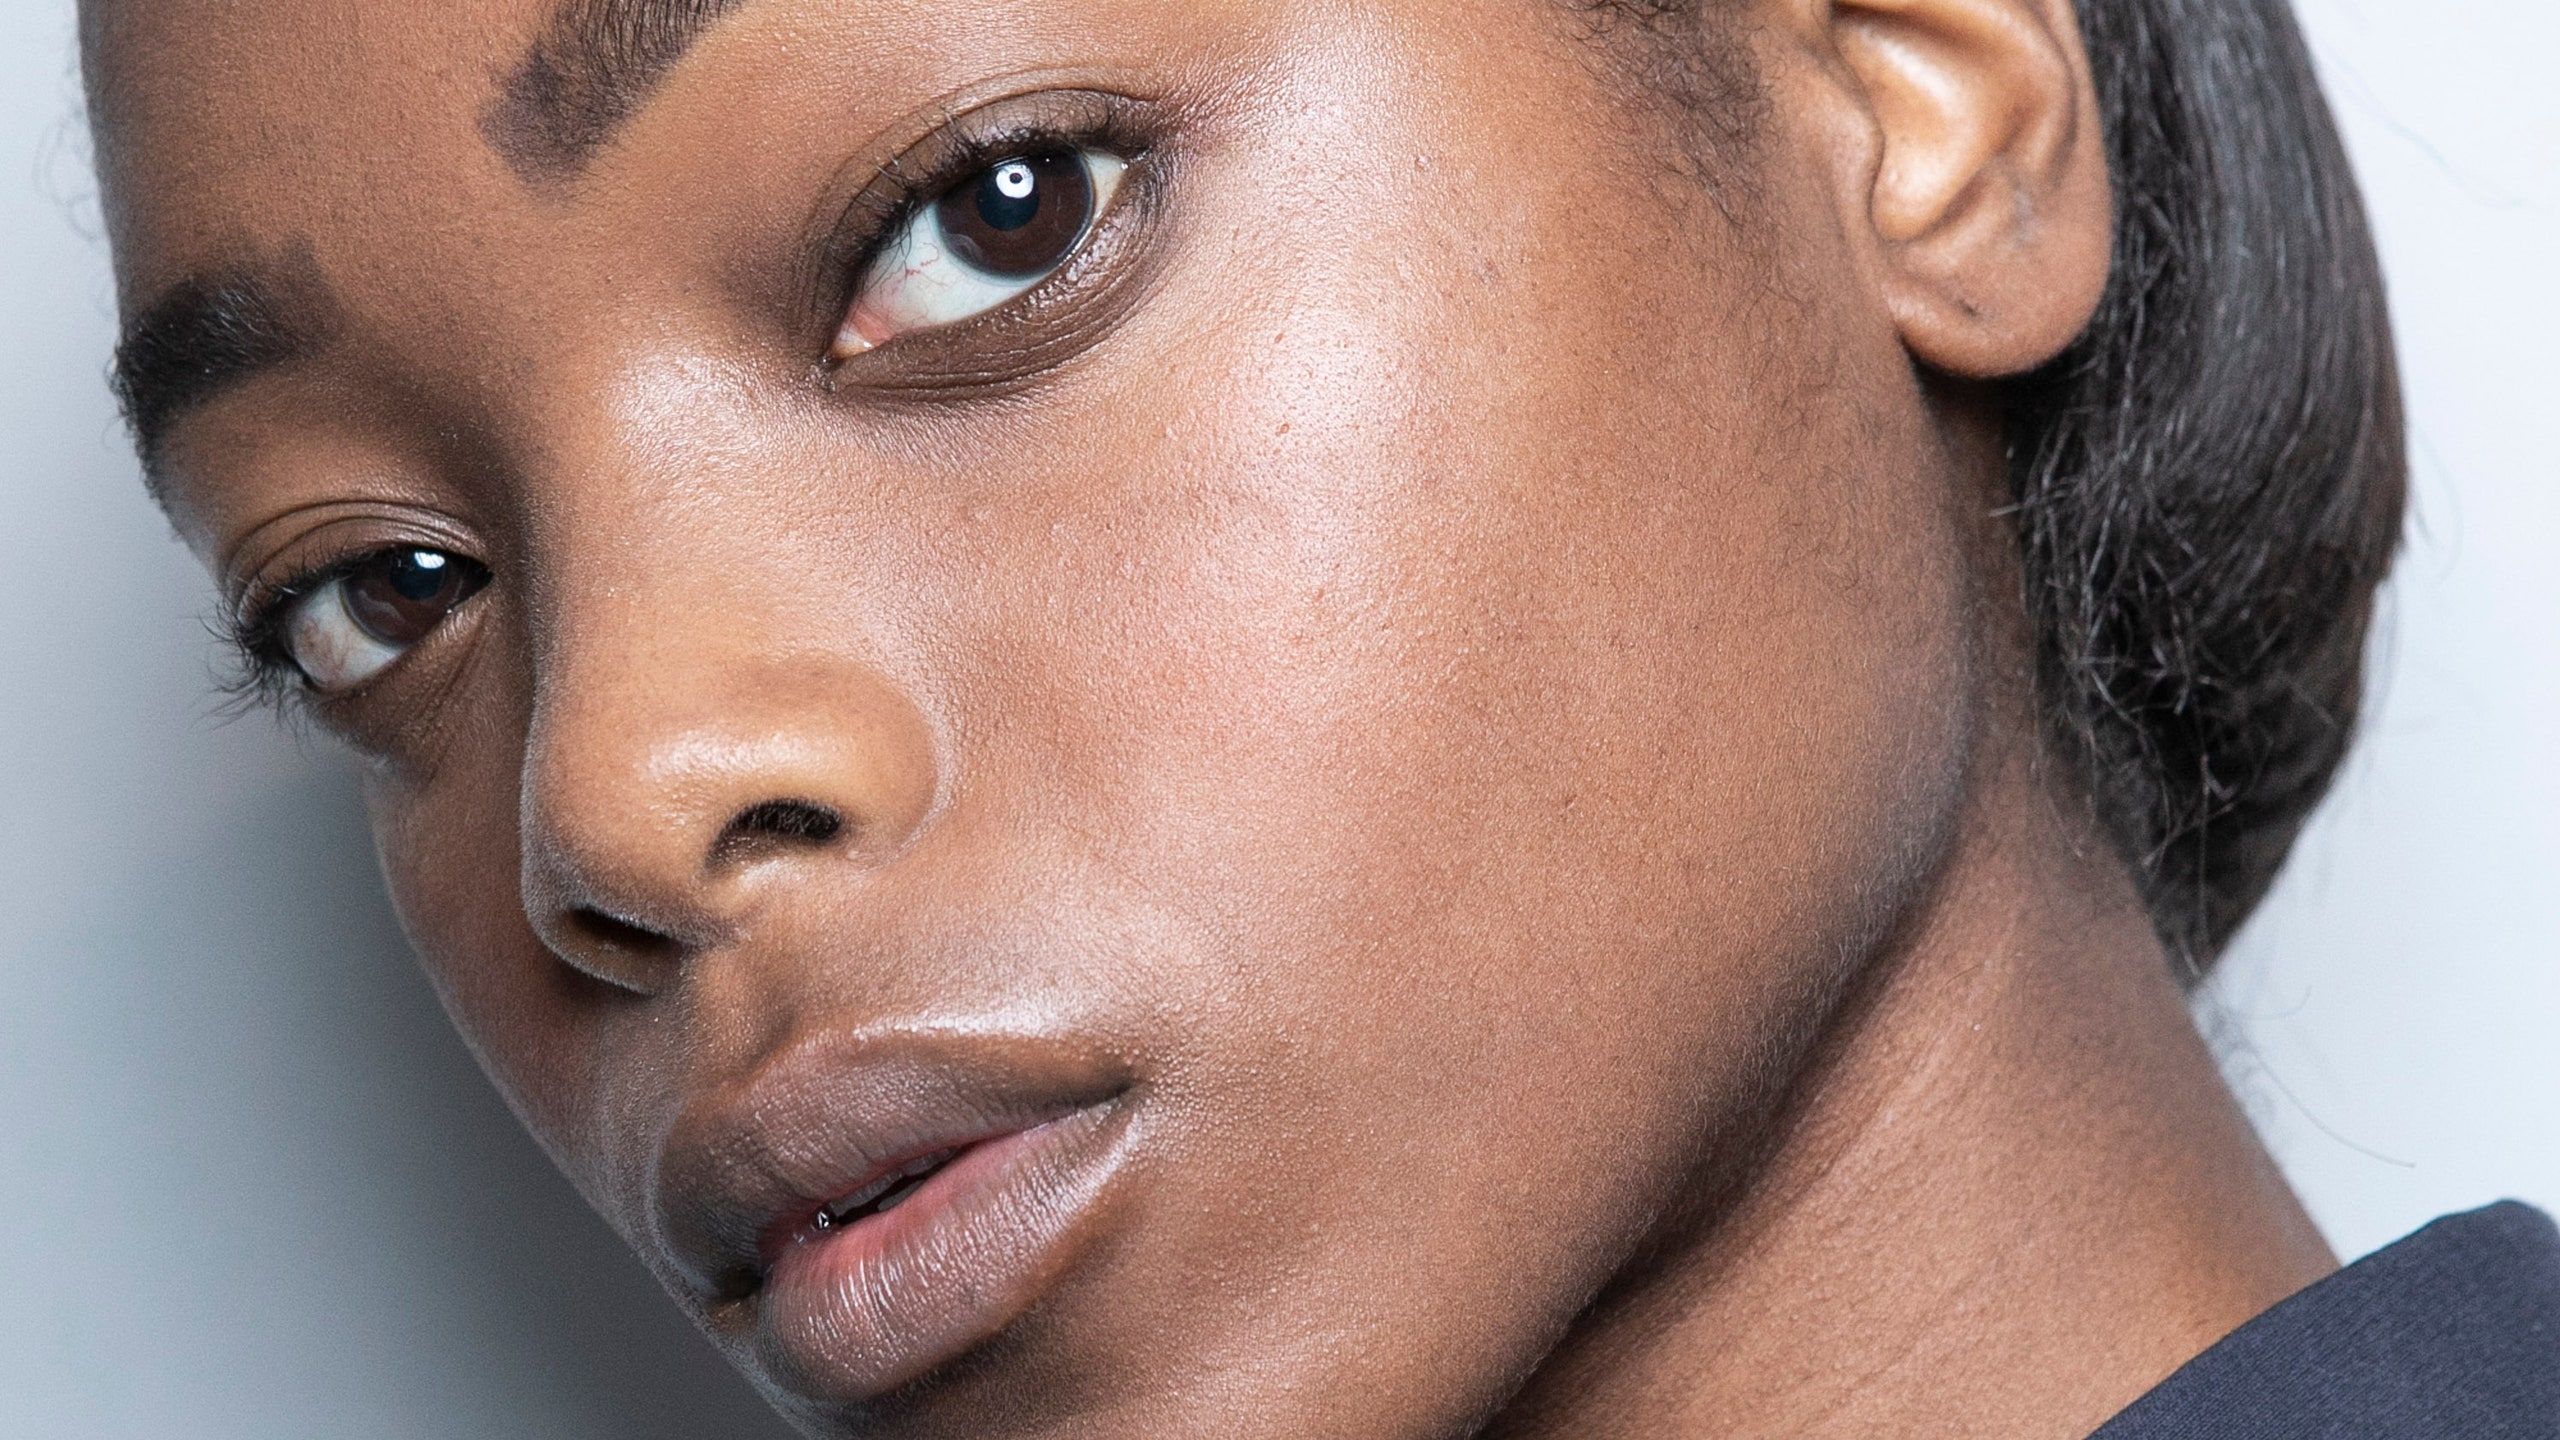 How To Get Rid Of Blackheads: 8 Dermatologist Approved Tips